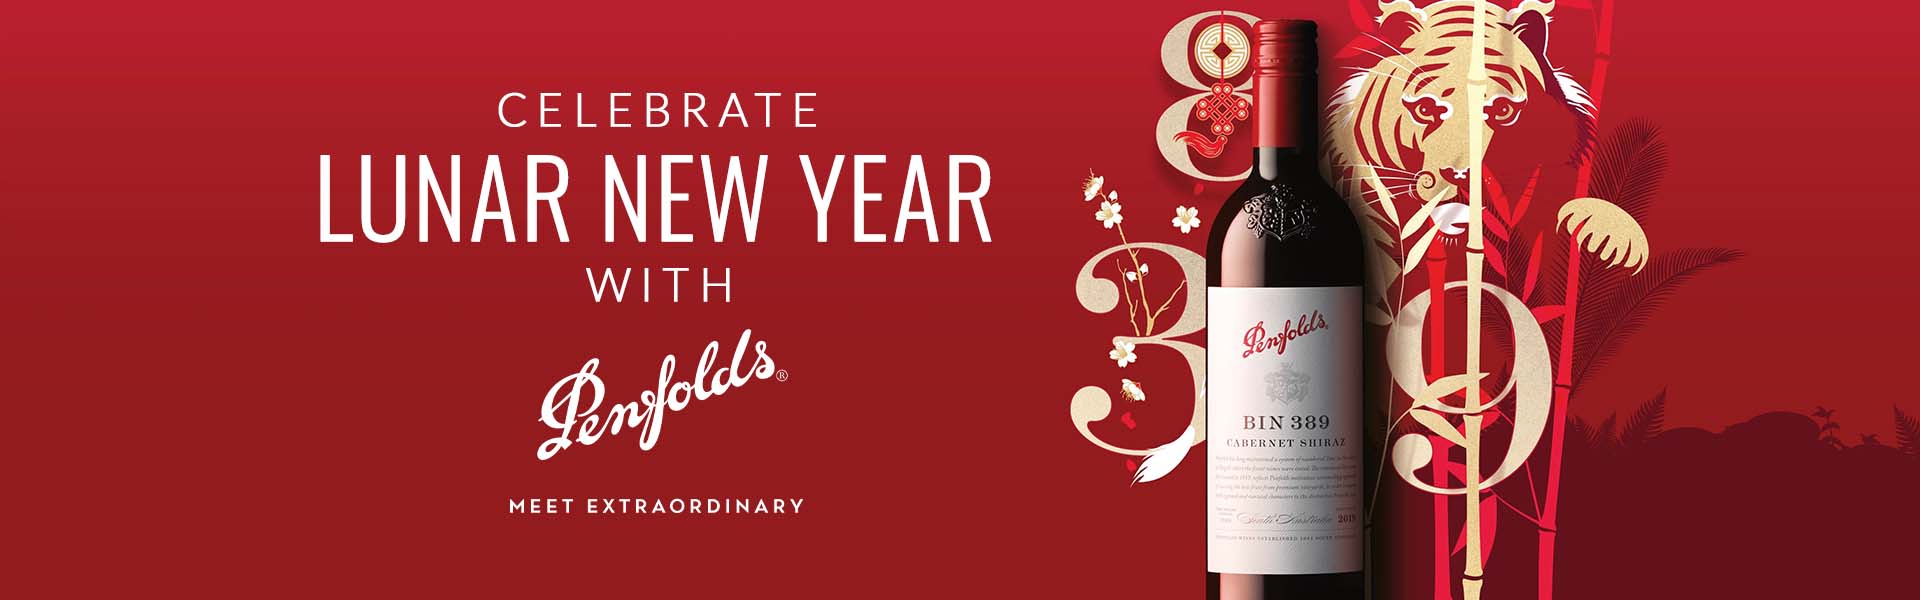 Celebrate Lunar New Year with Penfolds